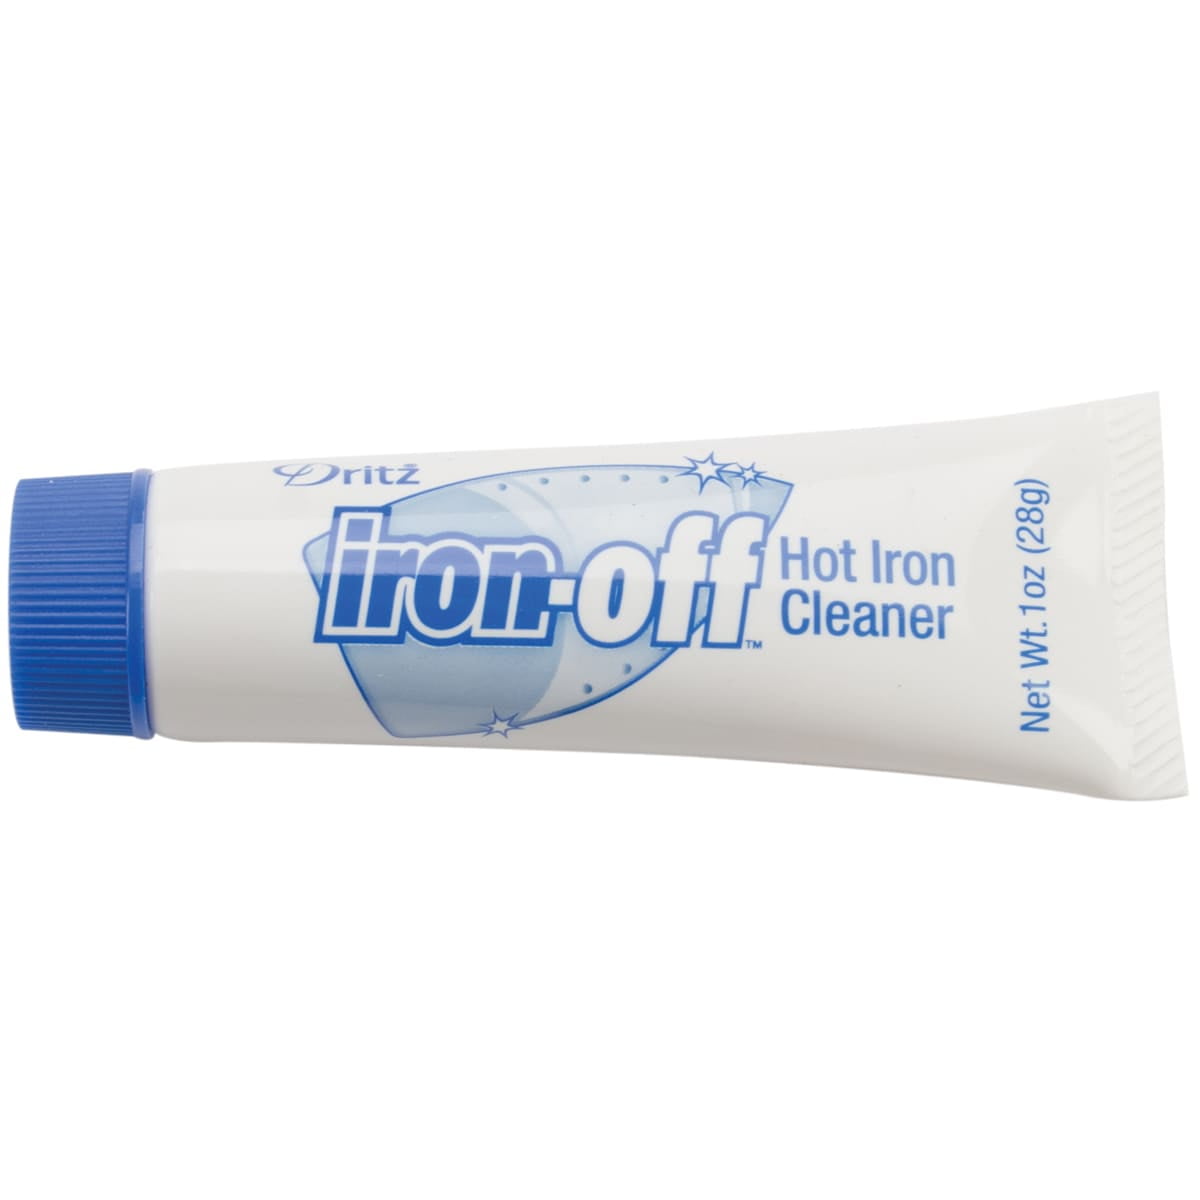 EZ-OFF IRON CLEANER PASTE listing with Udder Silo discount 